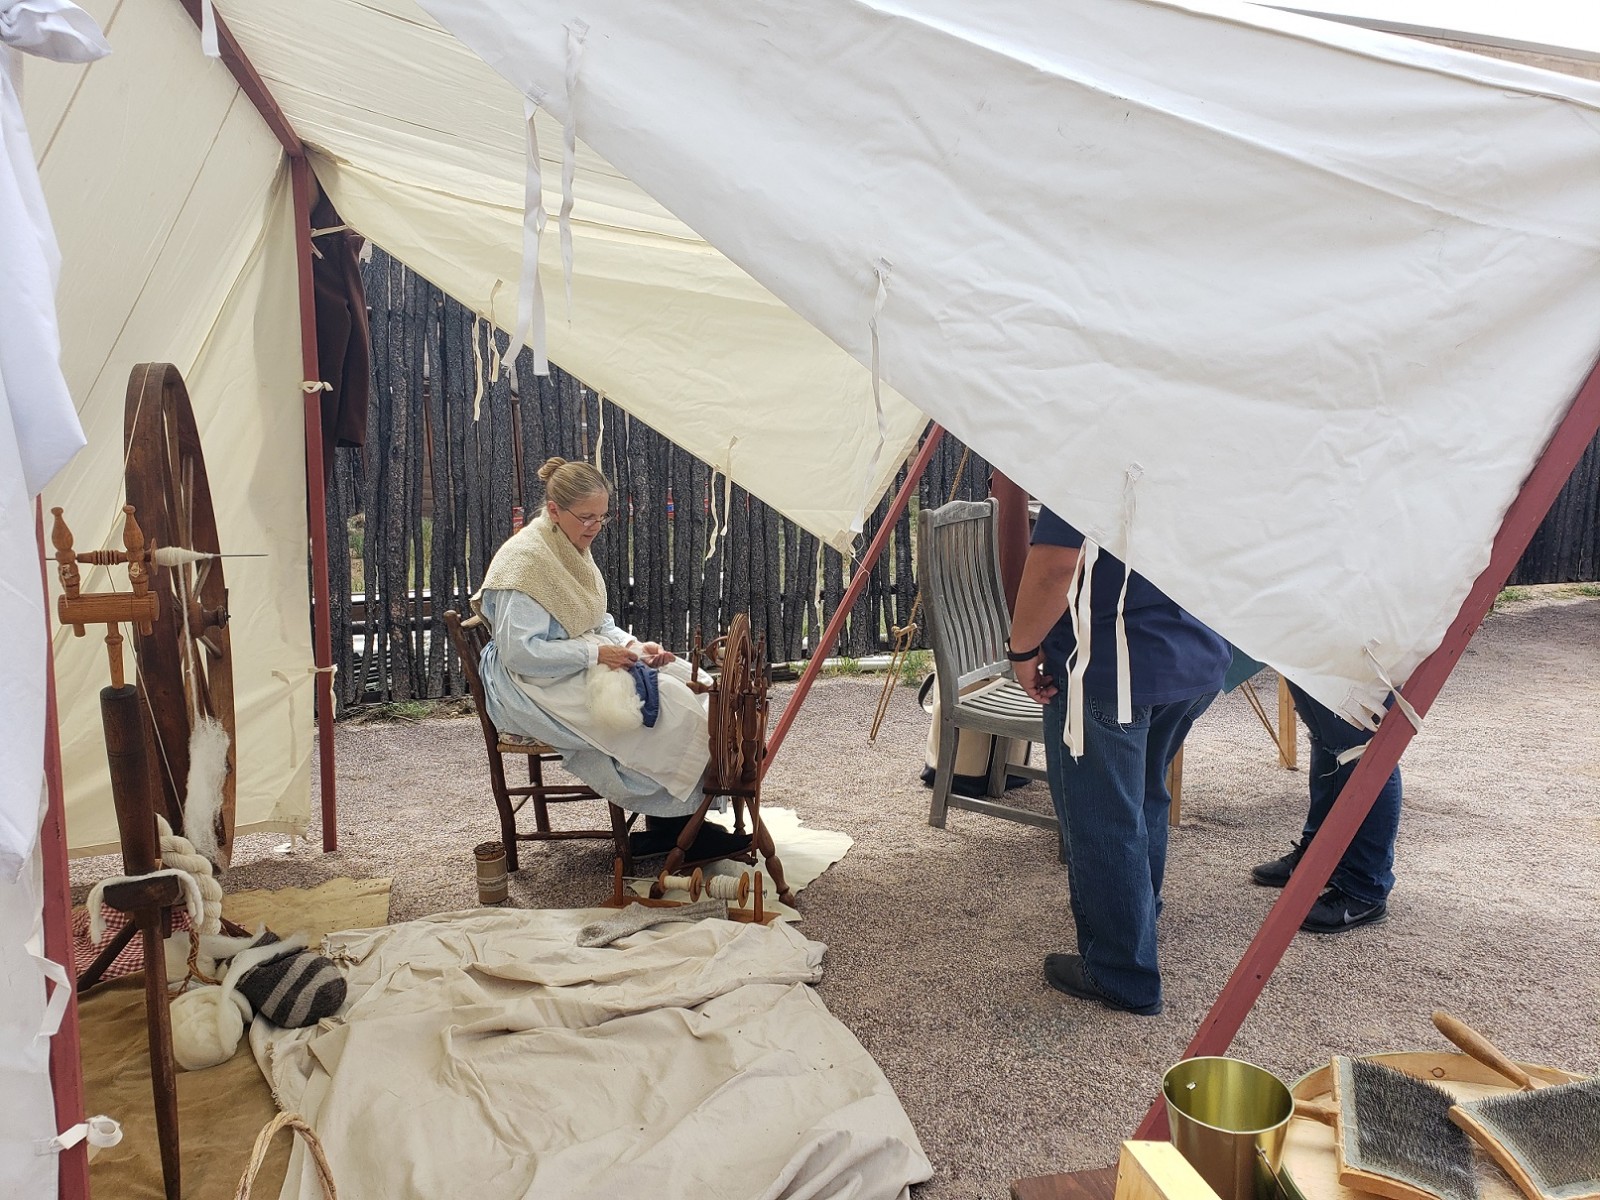 A volunteer from the New Mexico Farm & Ranch Heritage Museum provides a demonstration at Fort Selden's Spring Fling in 2019.